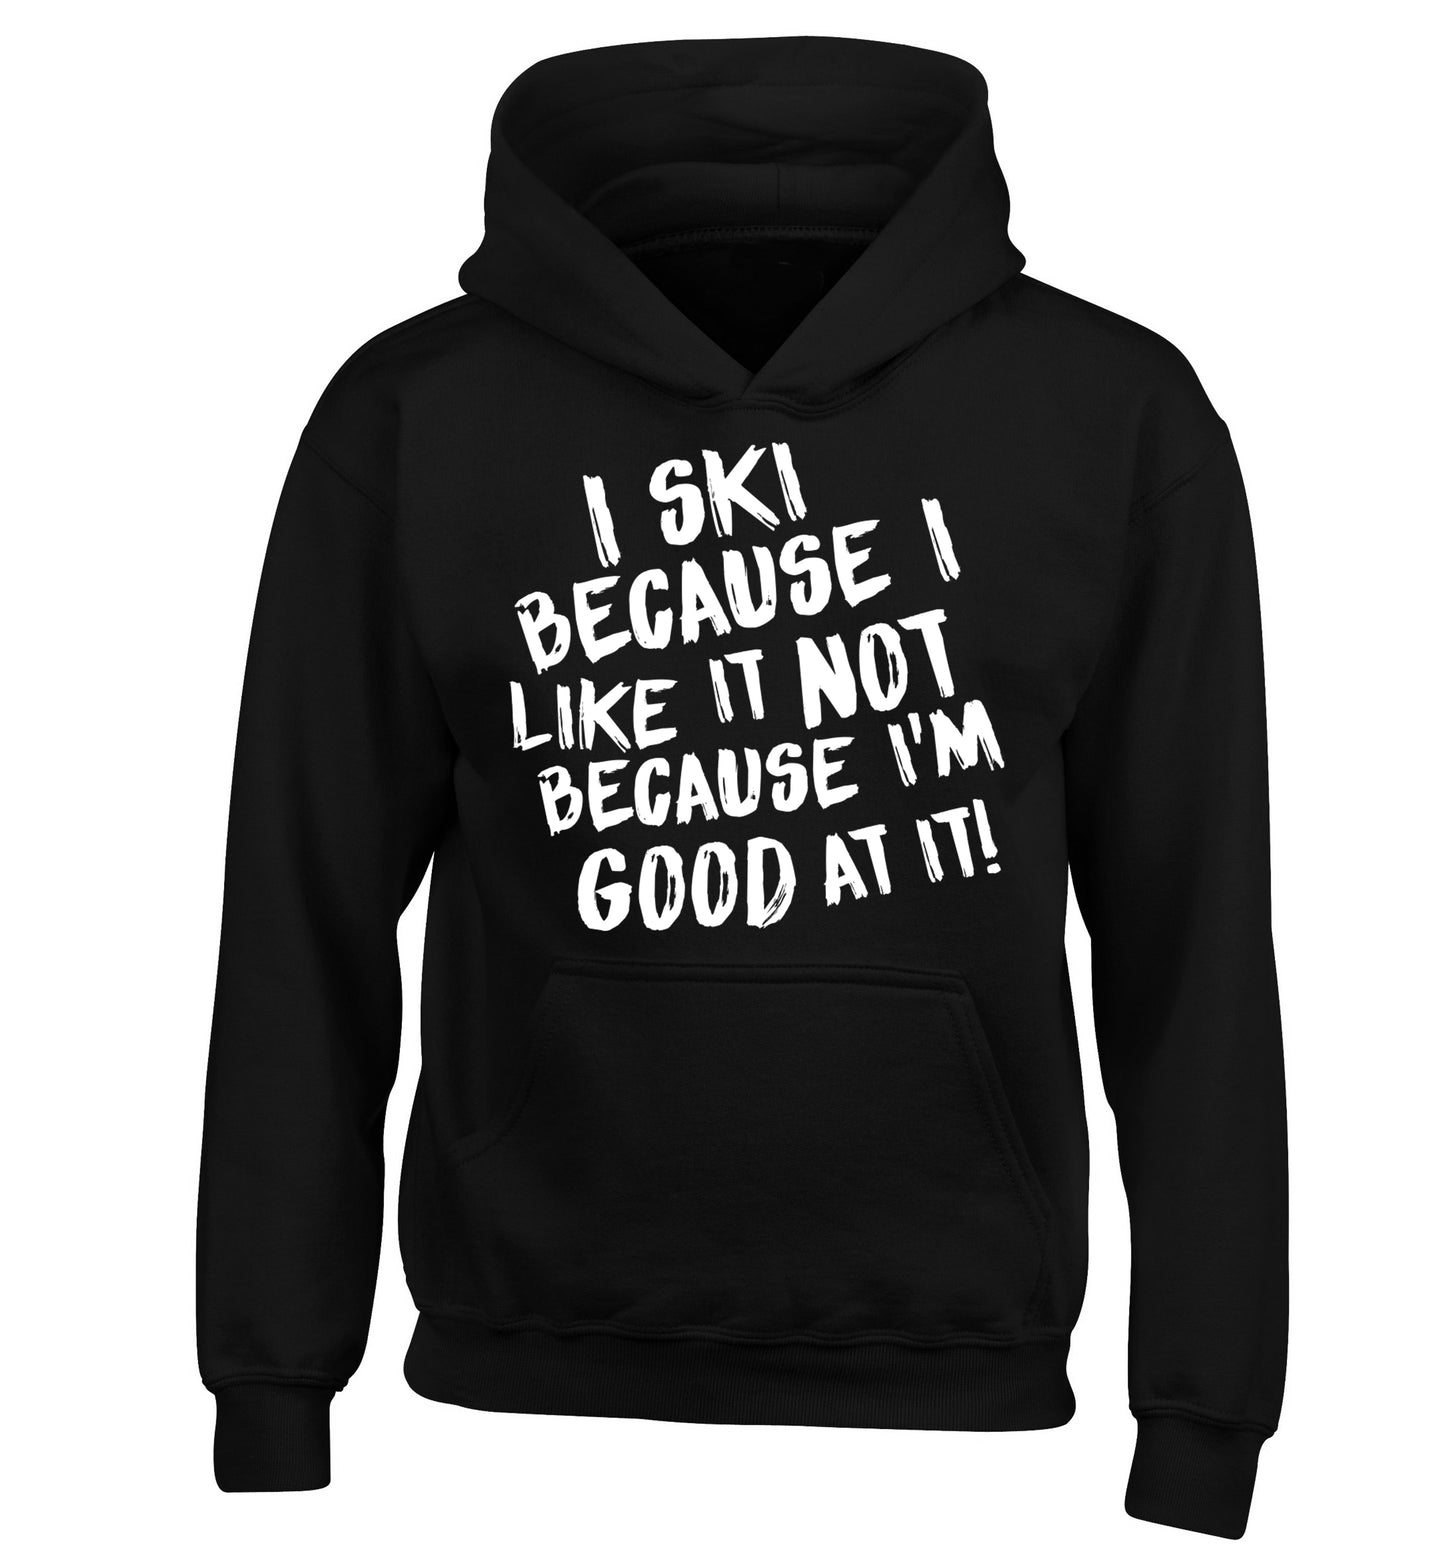 I ski because I like it not because I'm good at it children's black hoodie 12-14 Years